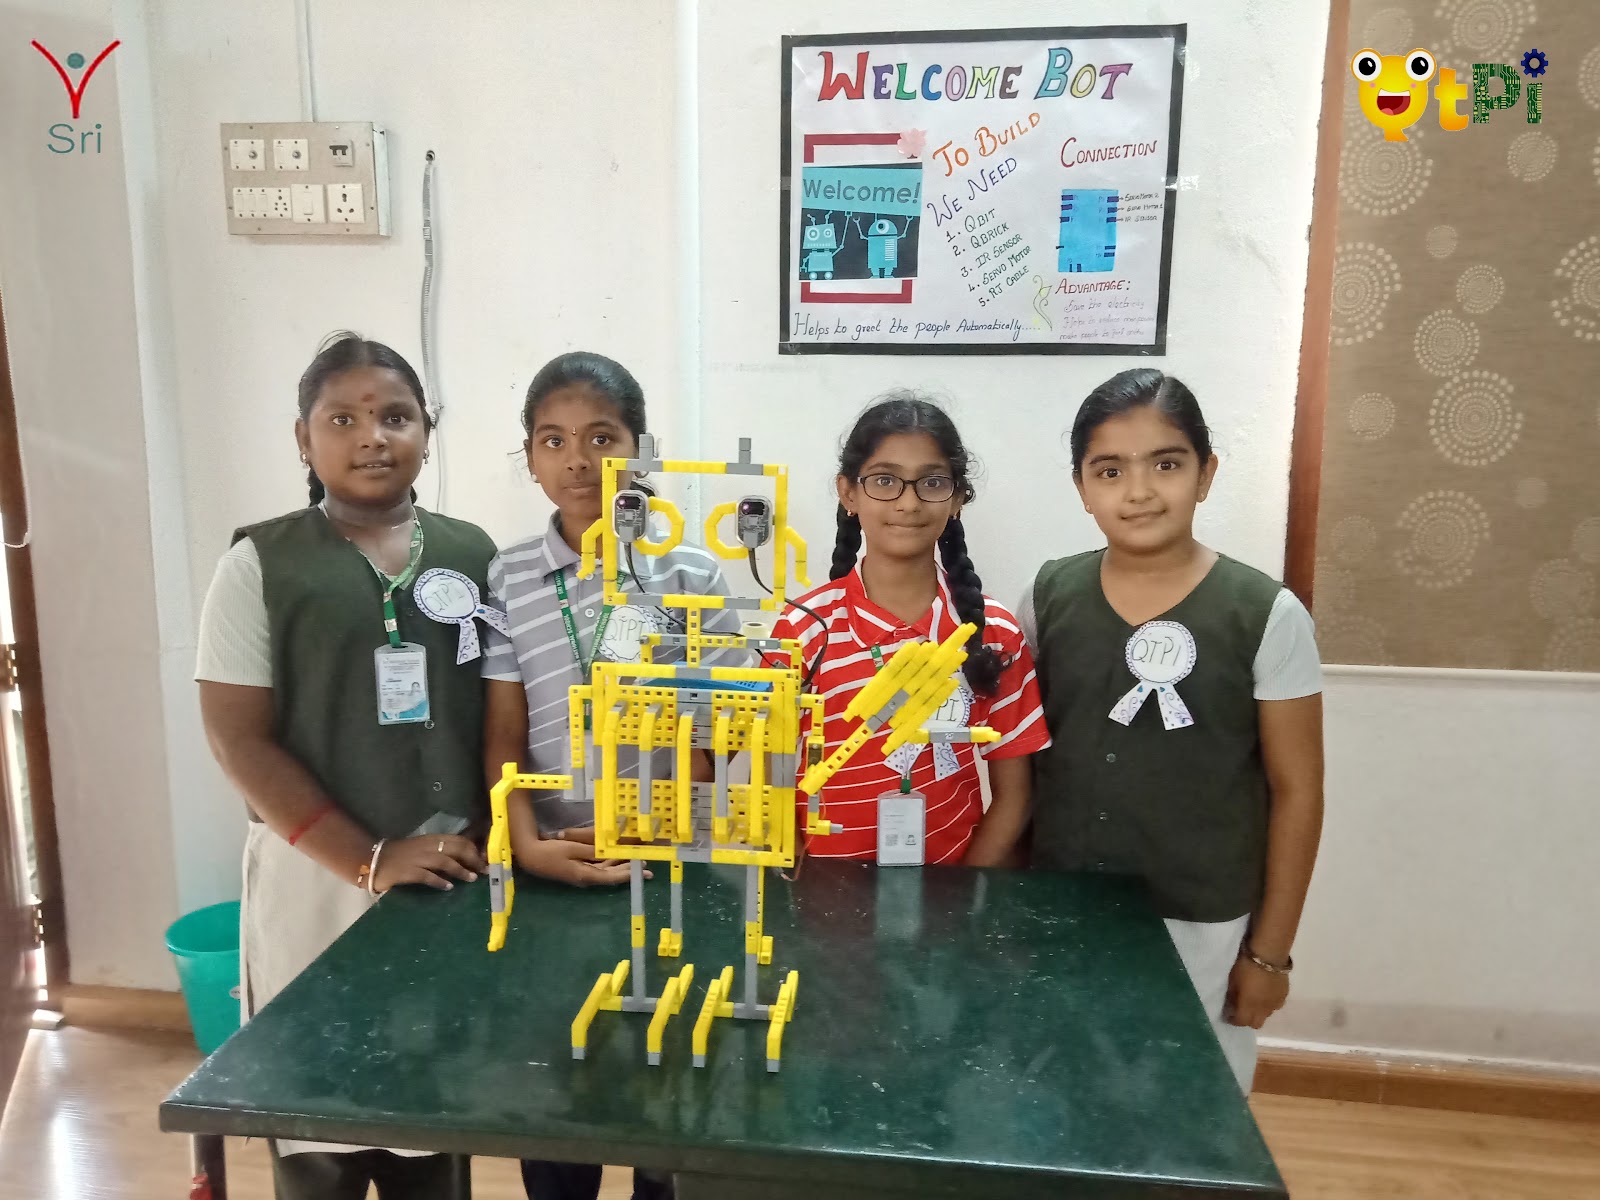 Students with their greeting bot